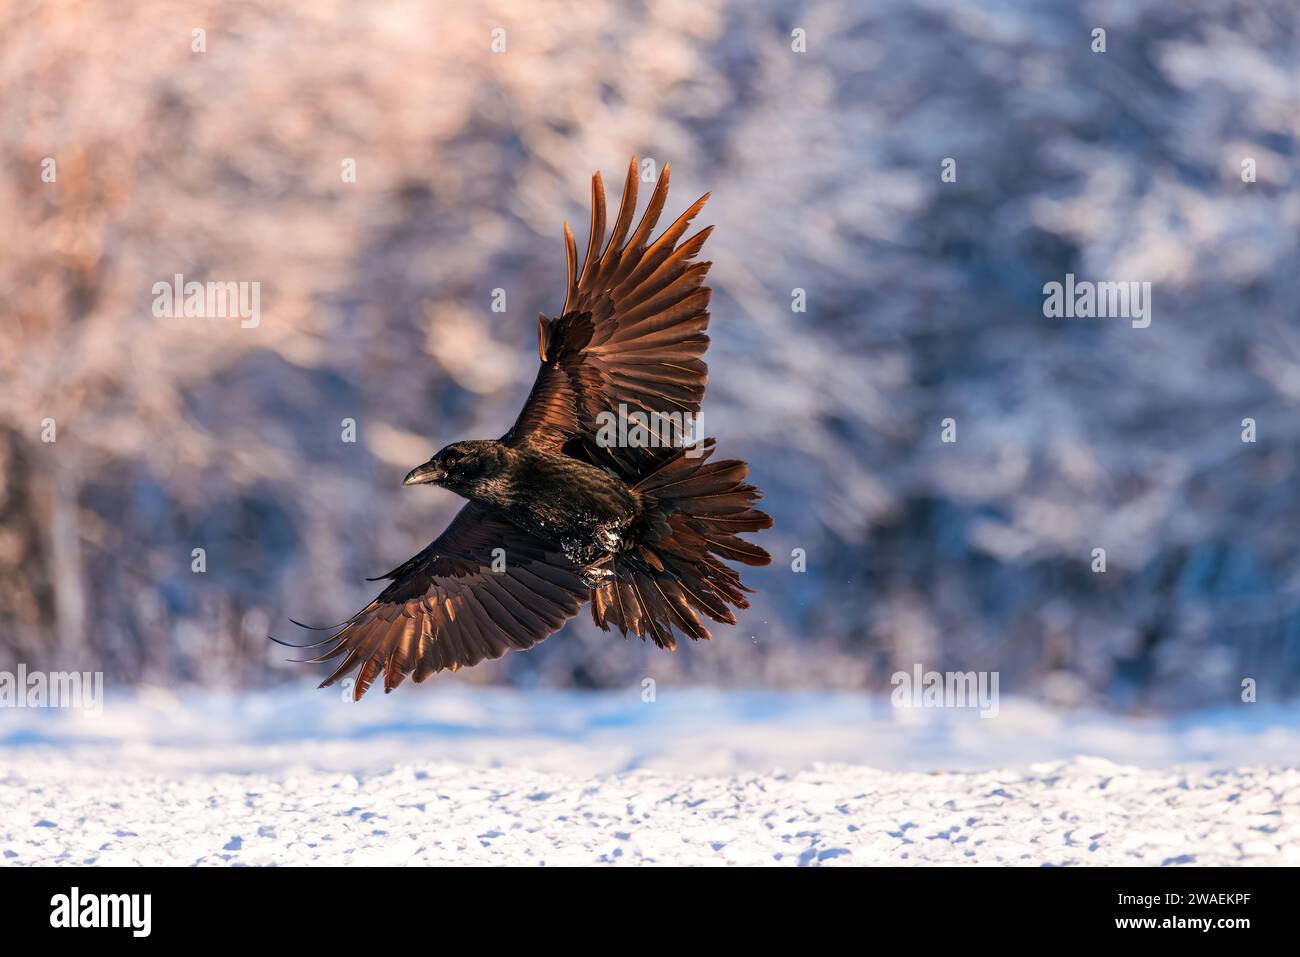 Black raven bird fly over snowy trees in wilderness forest wildlife nature Stock Photo